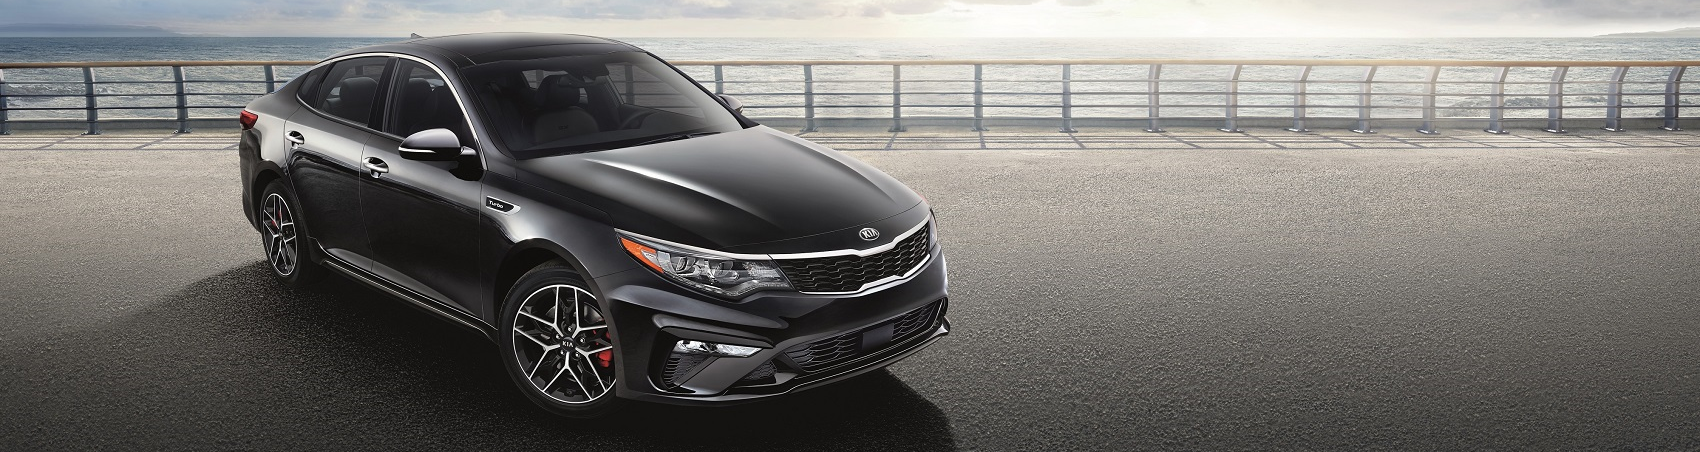 Certified Pre-Owned Kia Optima for Sale